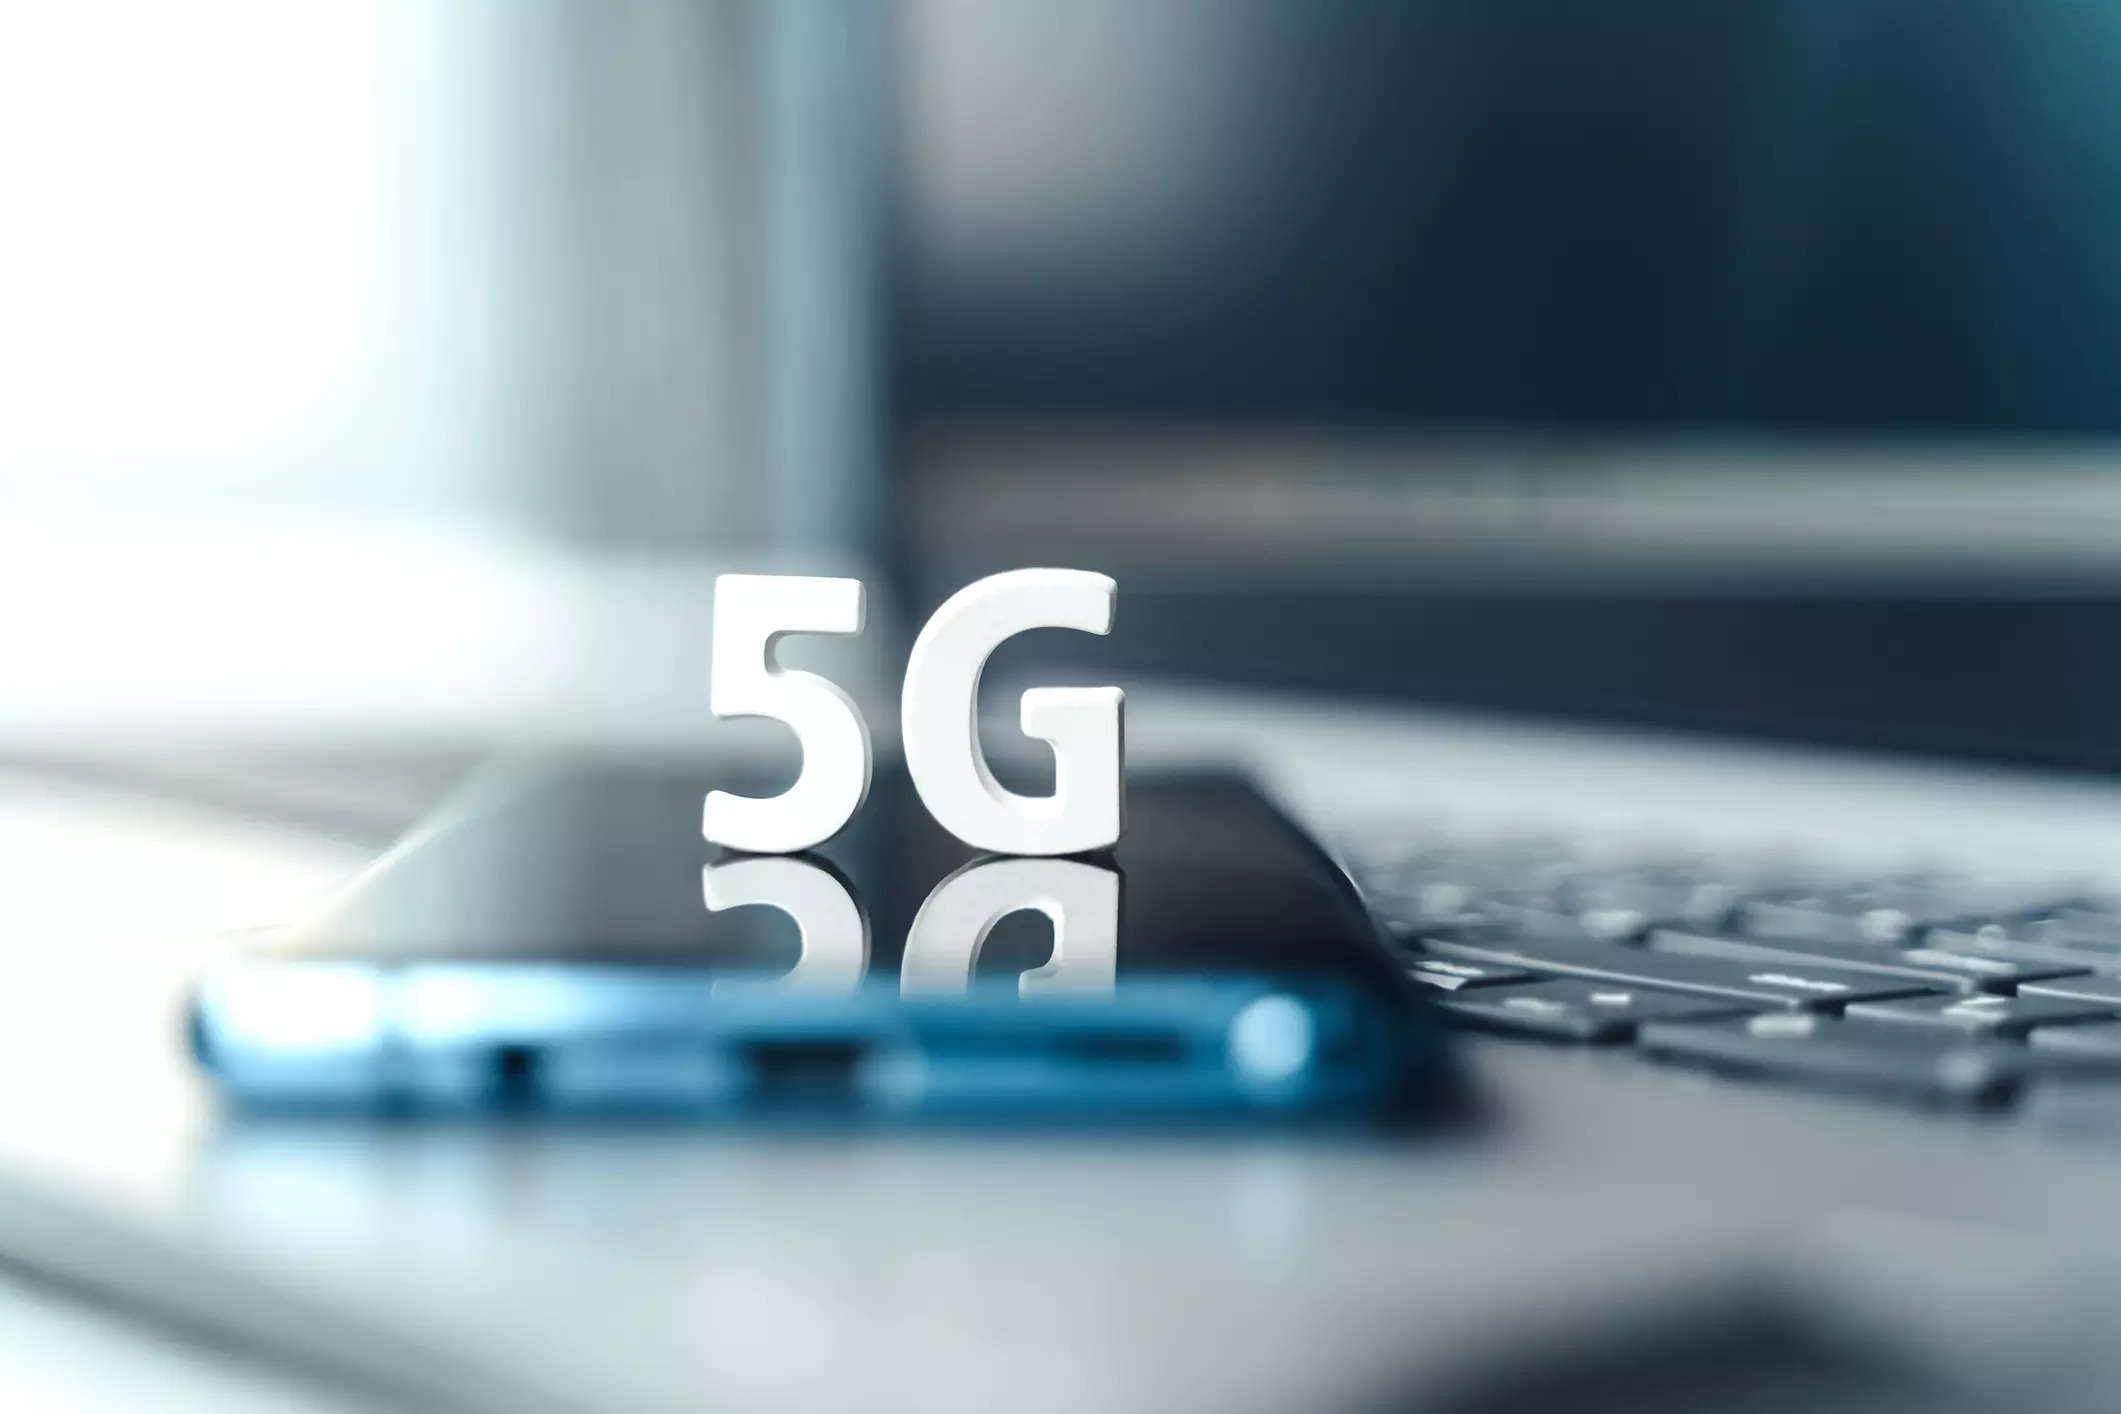 Telecom Diary: 2022 to catapult telecom industry to next gen 5G technology